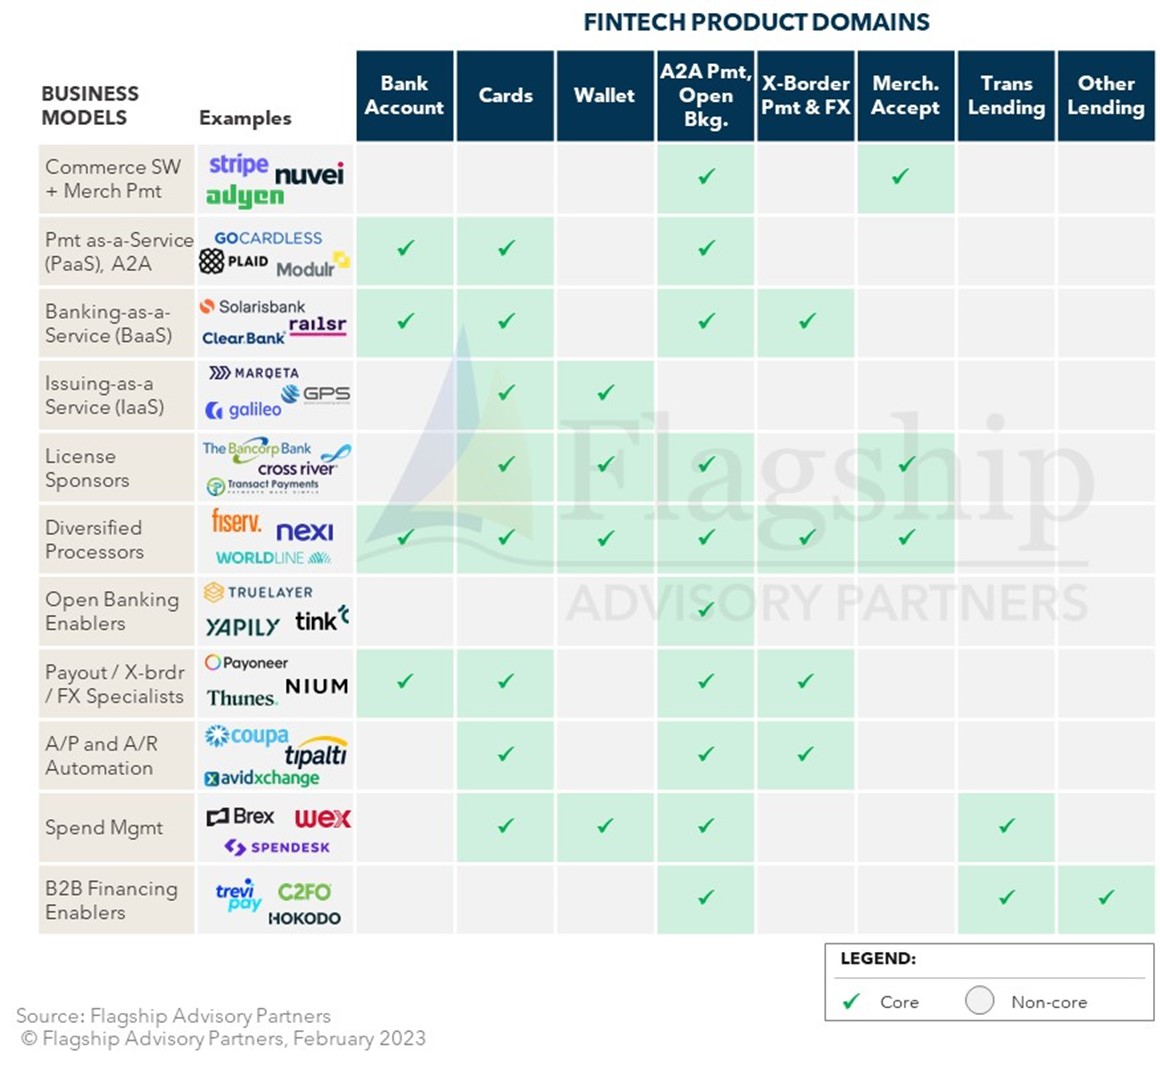 We summarise 11 key business models in the chart